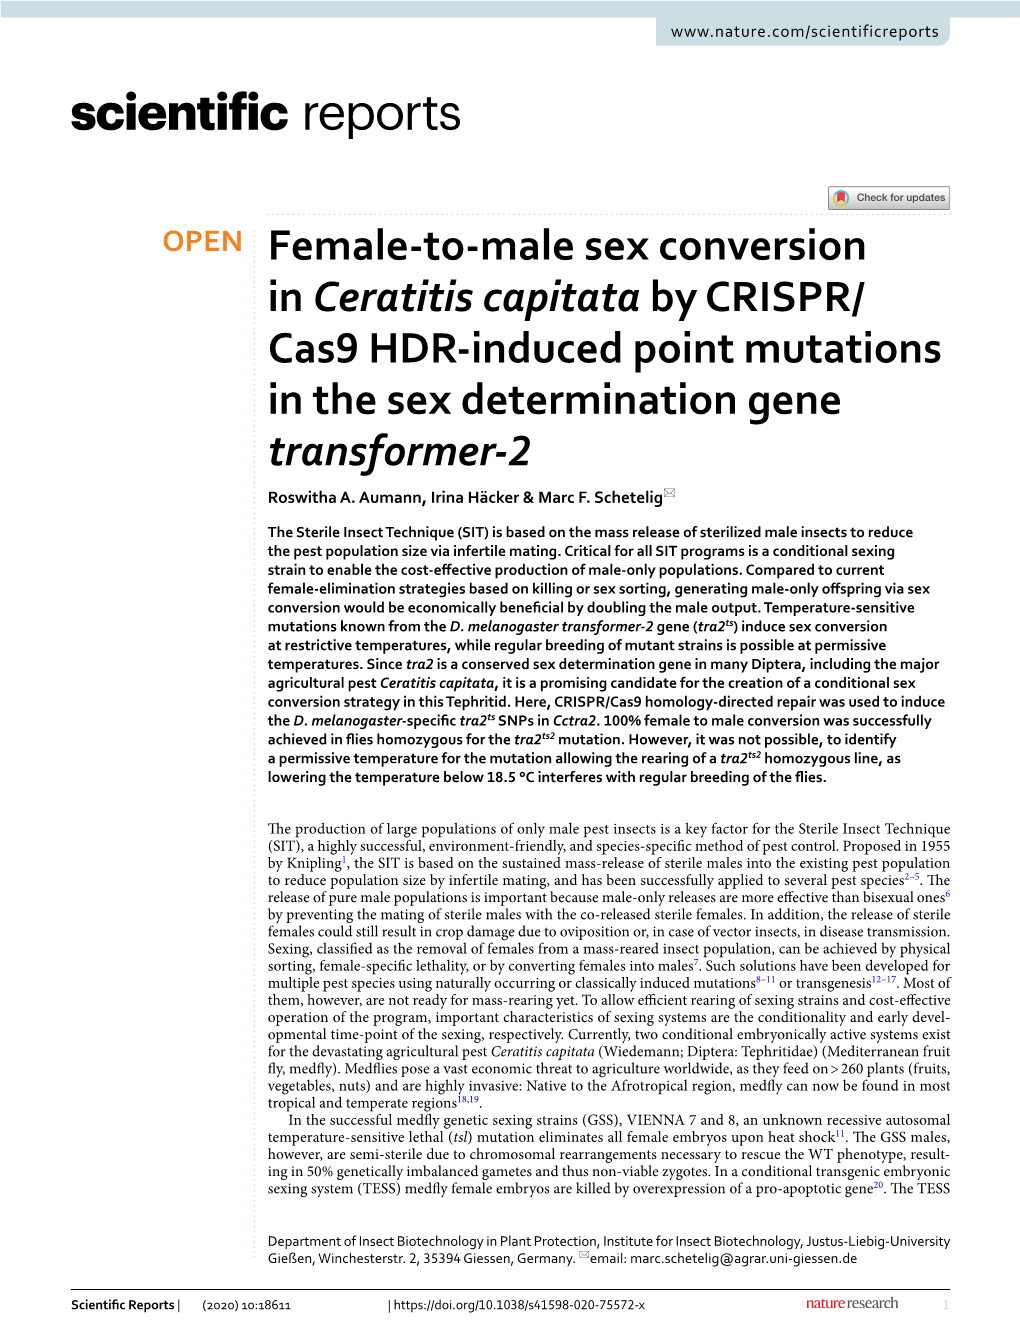 Female-To-Male Sex Conversion in Ceratitis Capitata by CRISPR/Cas9 HDR-Induced Point Mutations in the Sex Determination Gene